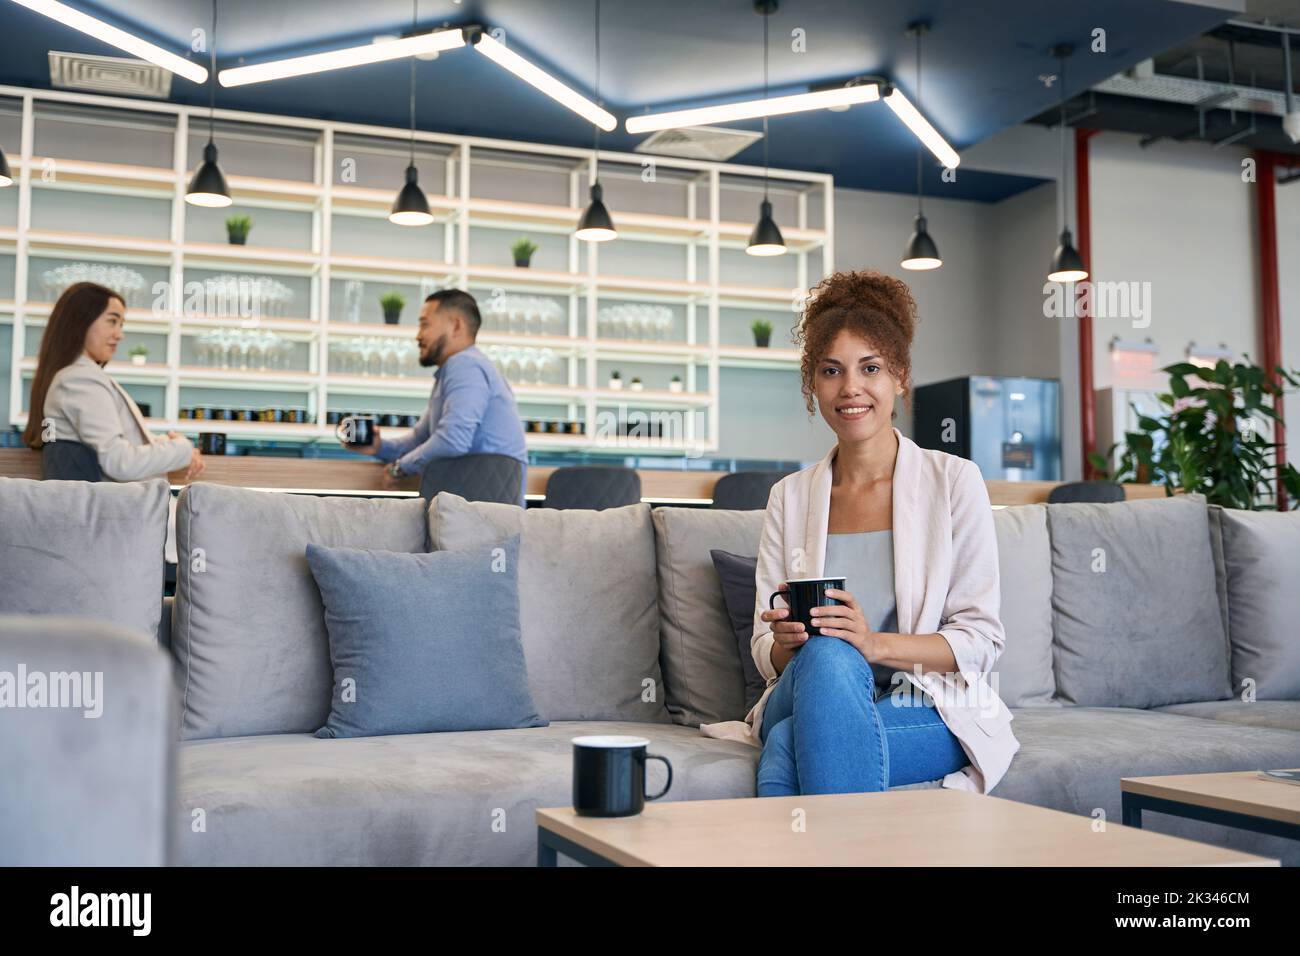 Cheerful young woman enjoying her work break in co-working space Stock Photo